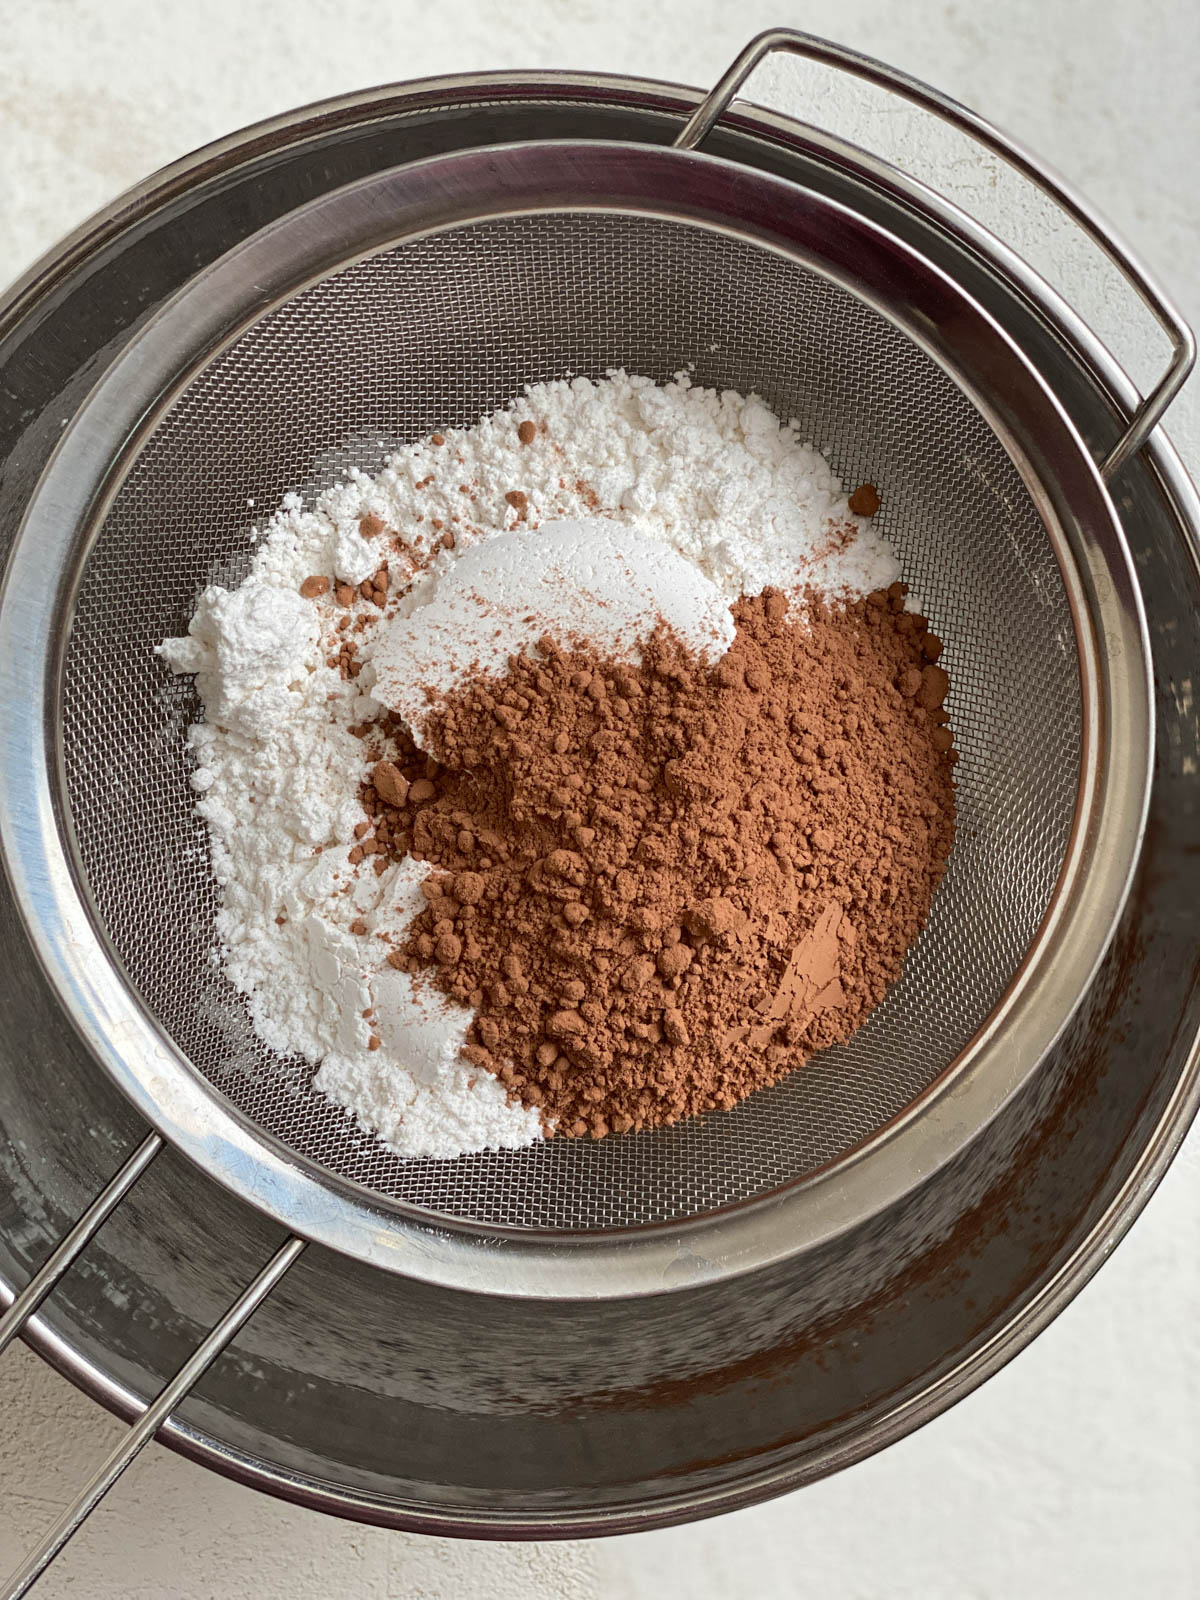 process of ingredients for Vegan Chocolate Frosting in a sifter